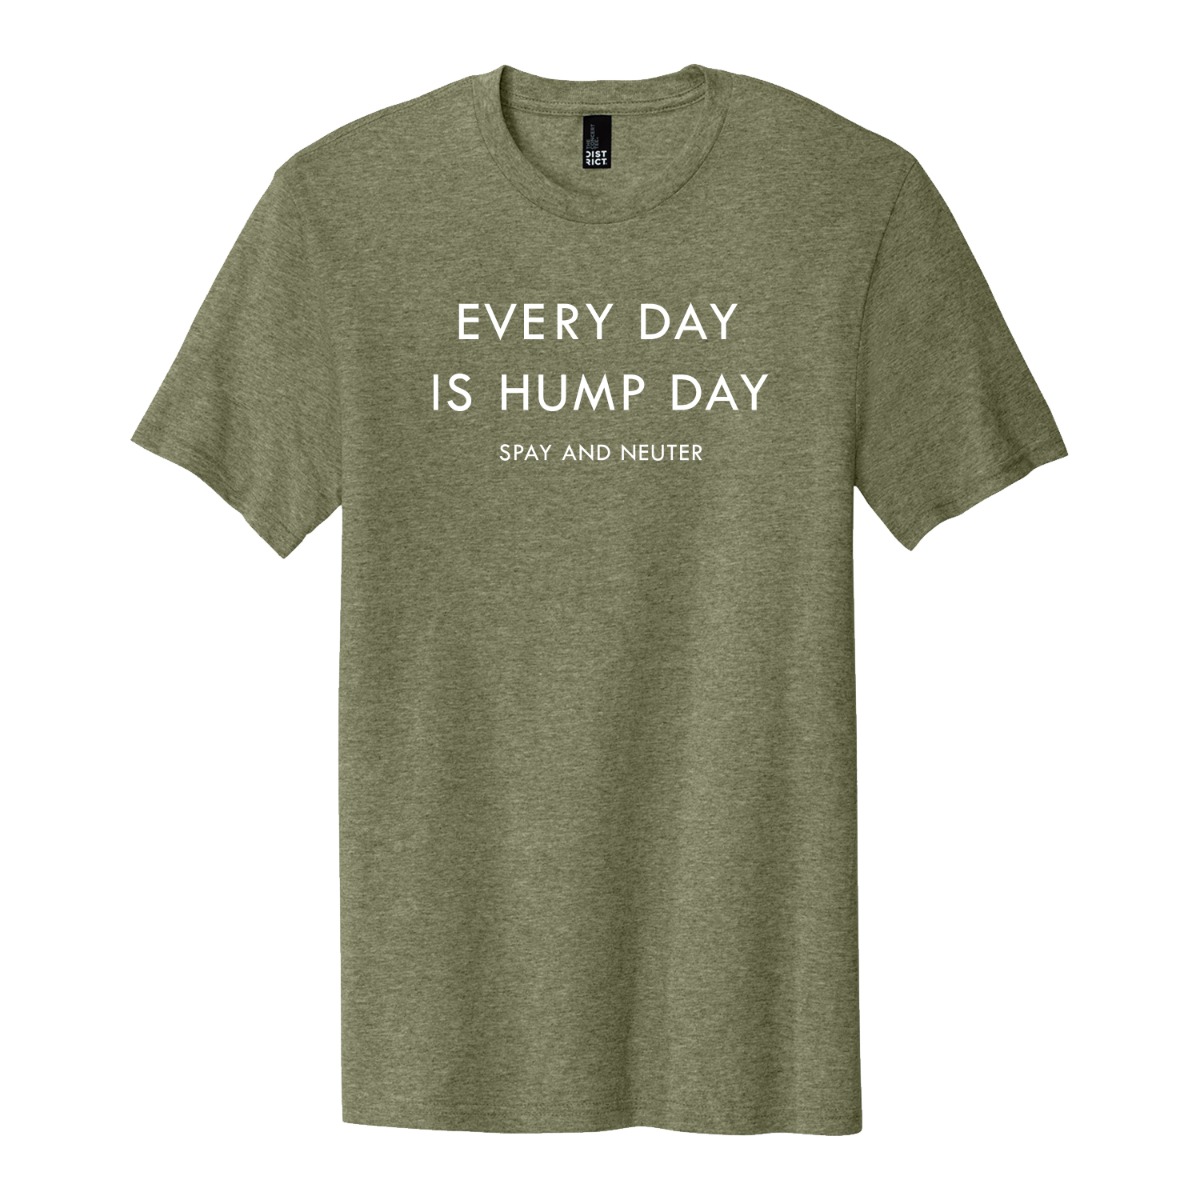 Spay and Neuter Shirt Every Day is Hump Day Shirt Animal 